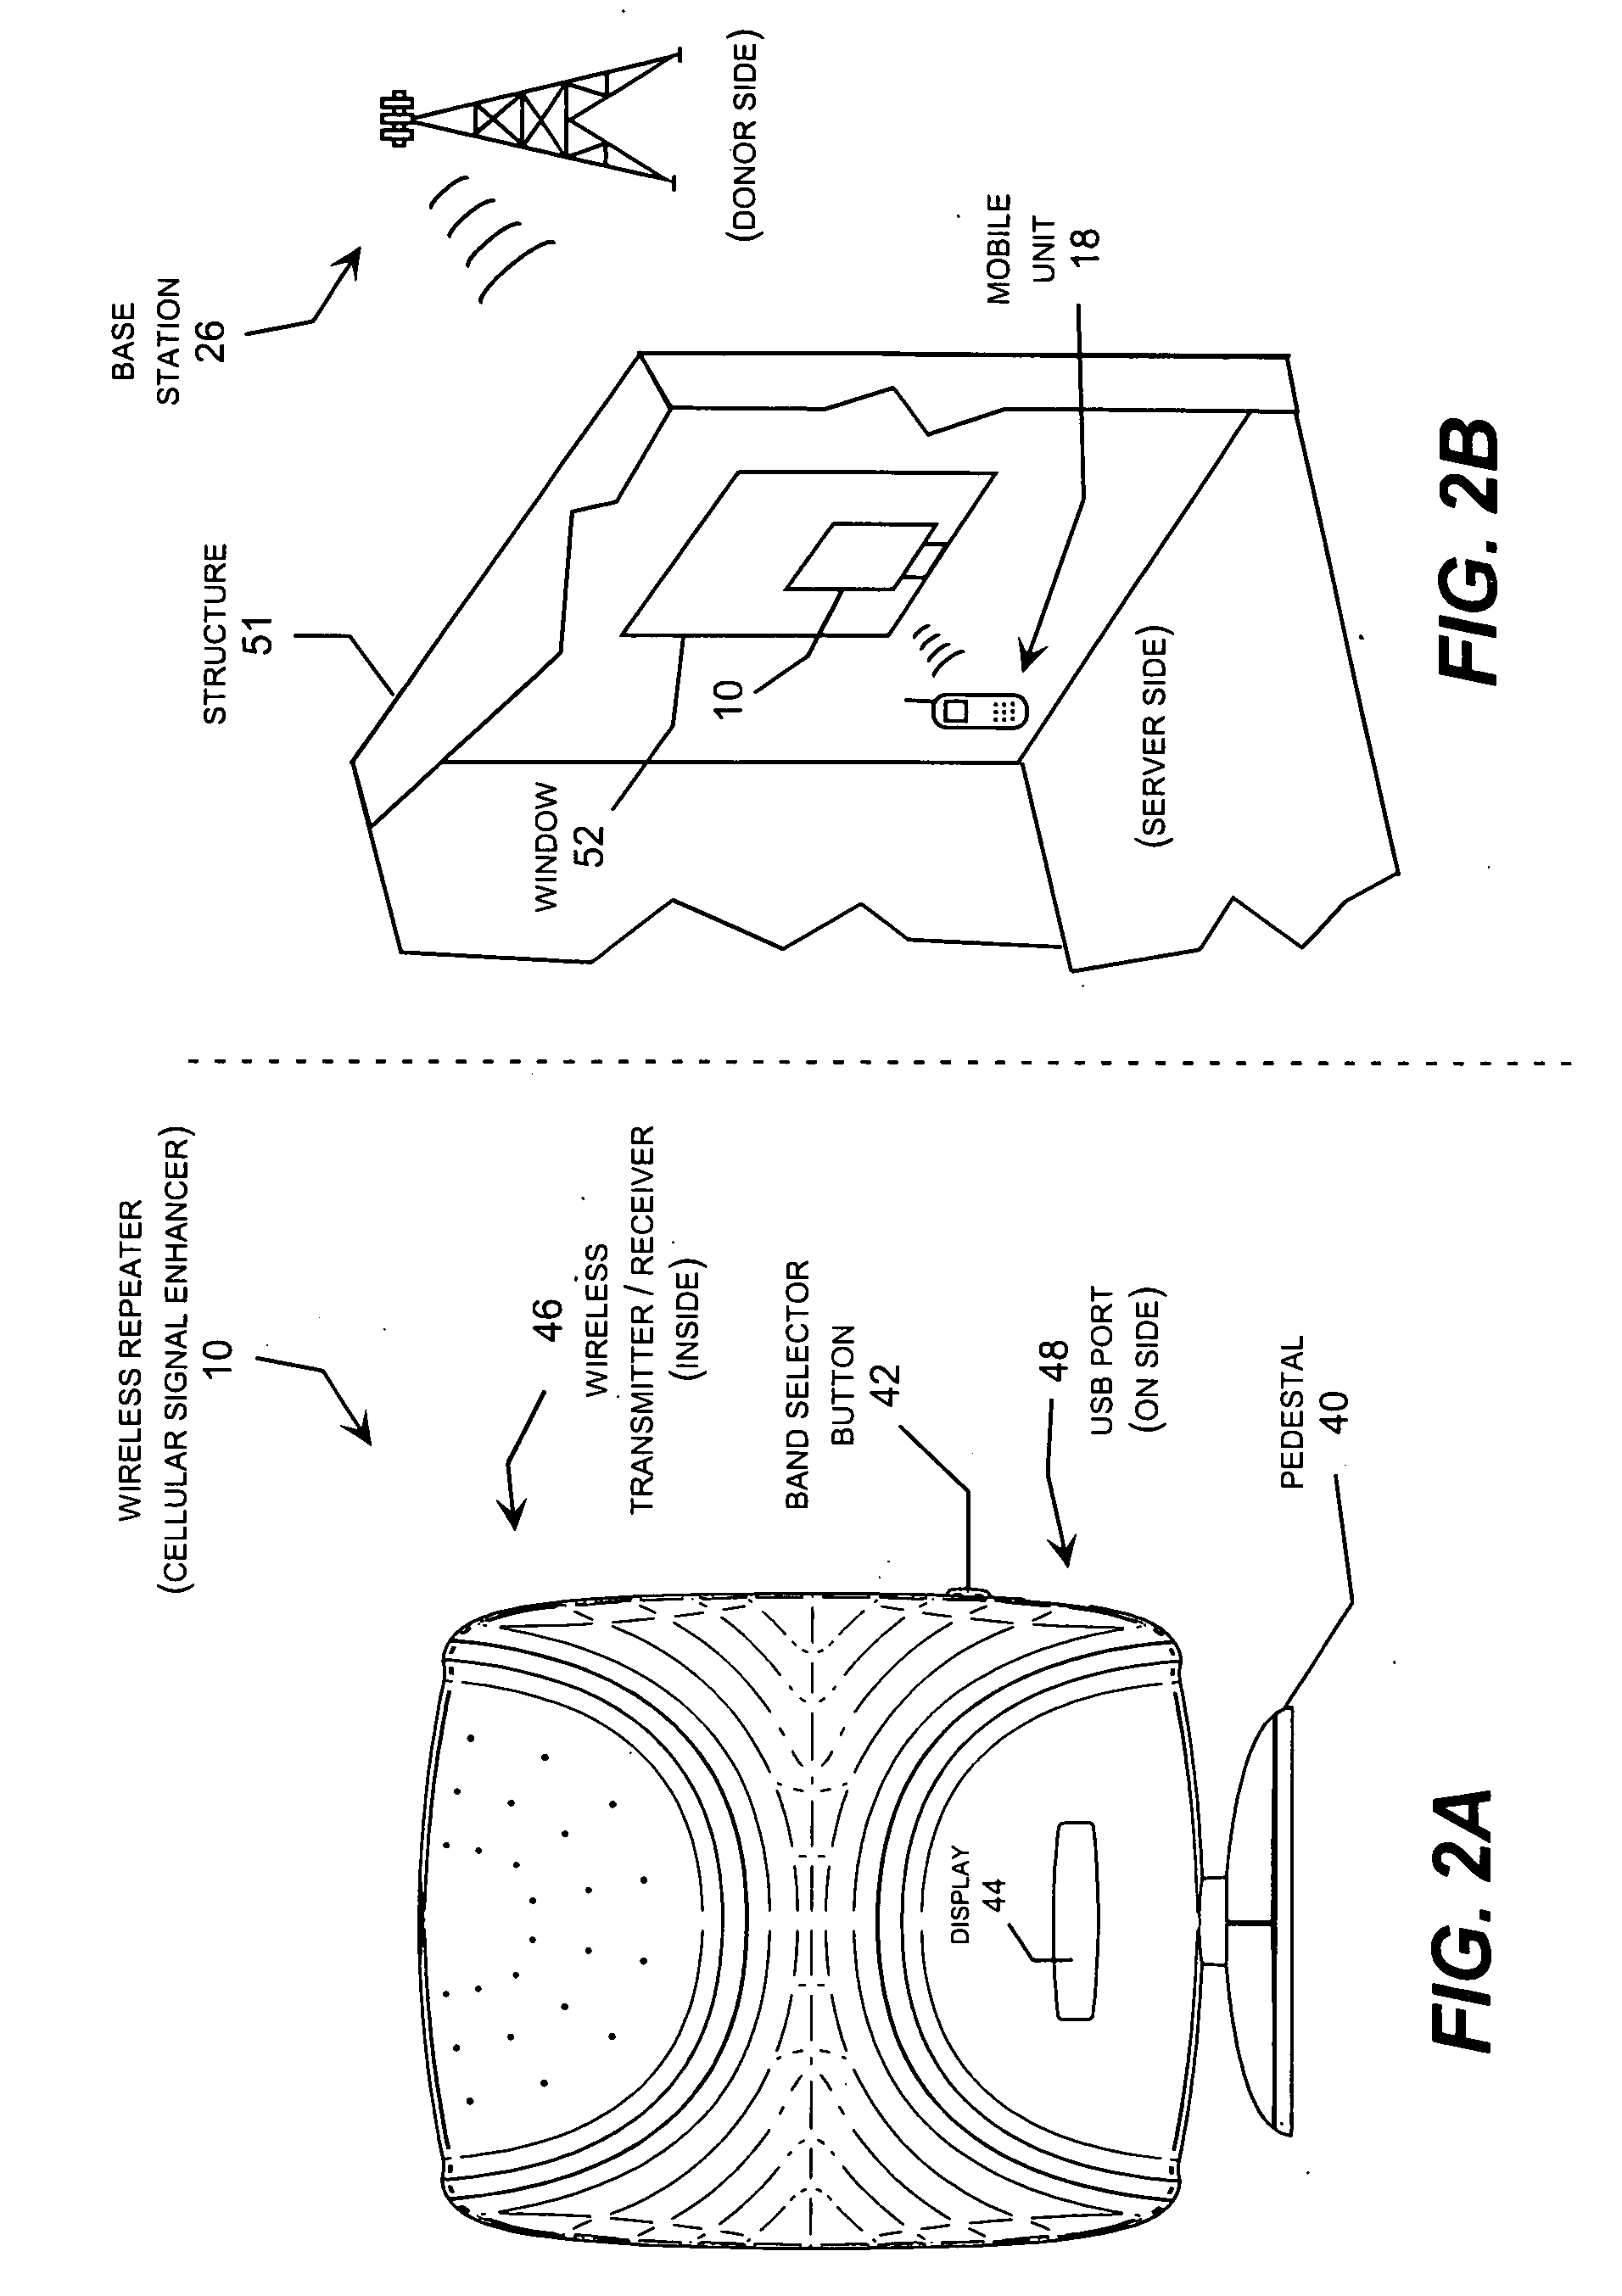 Wireless repeater with feedback suppression features